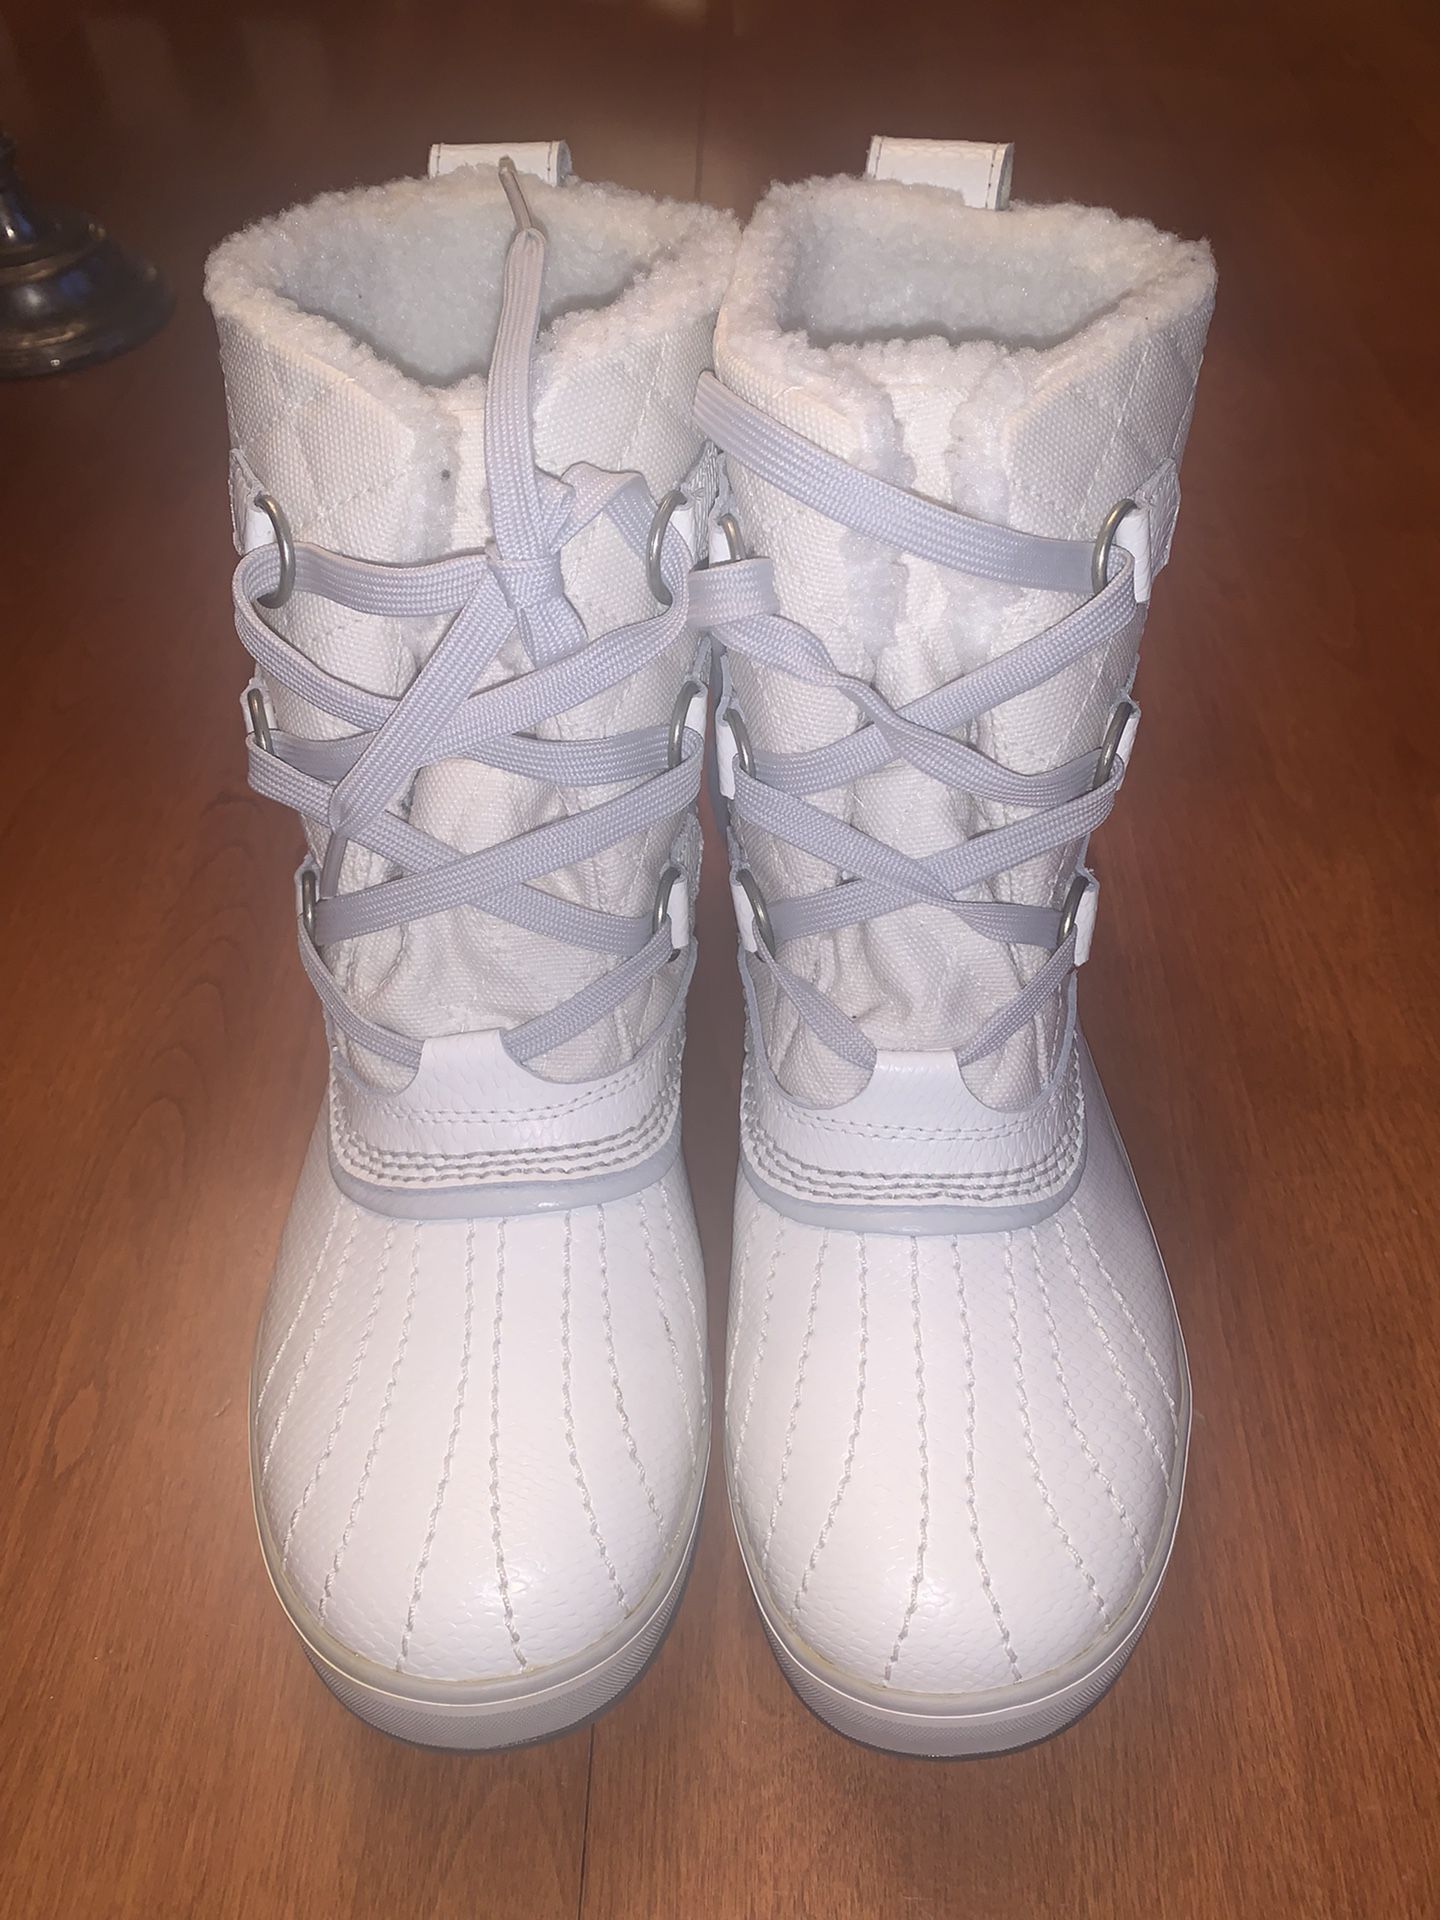 White/Light Gray Sorel Snow Boots Size 8. New with Box! 